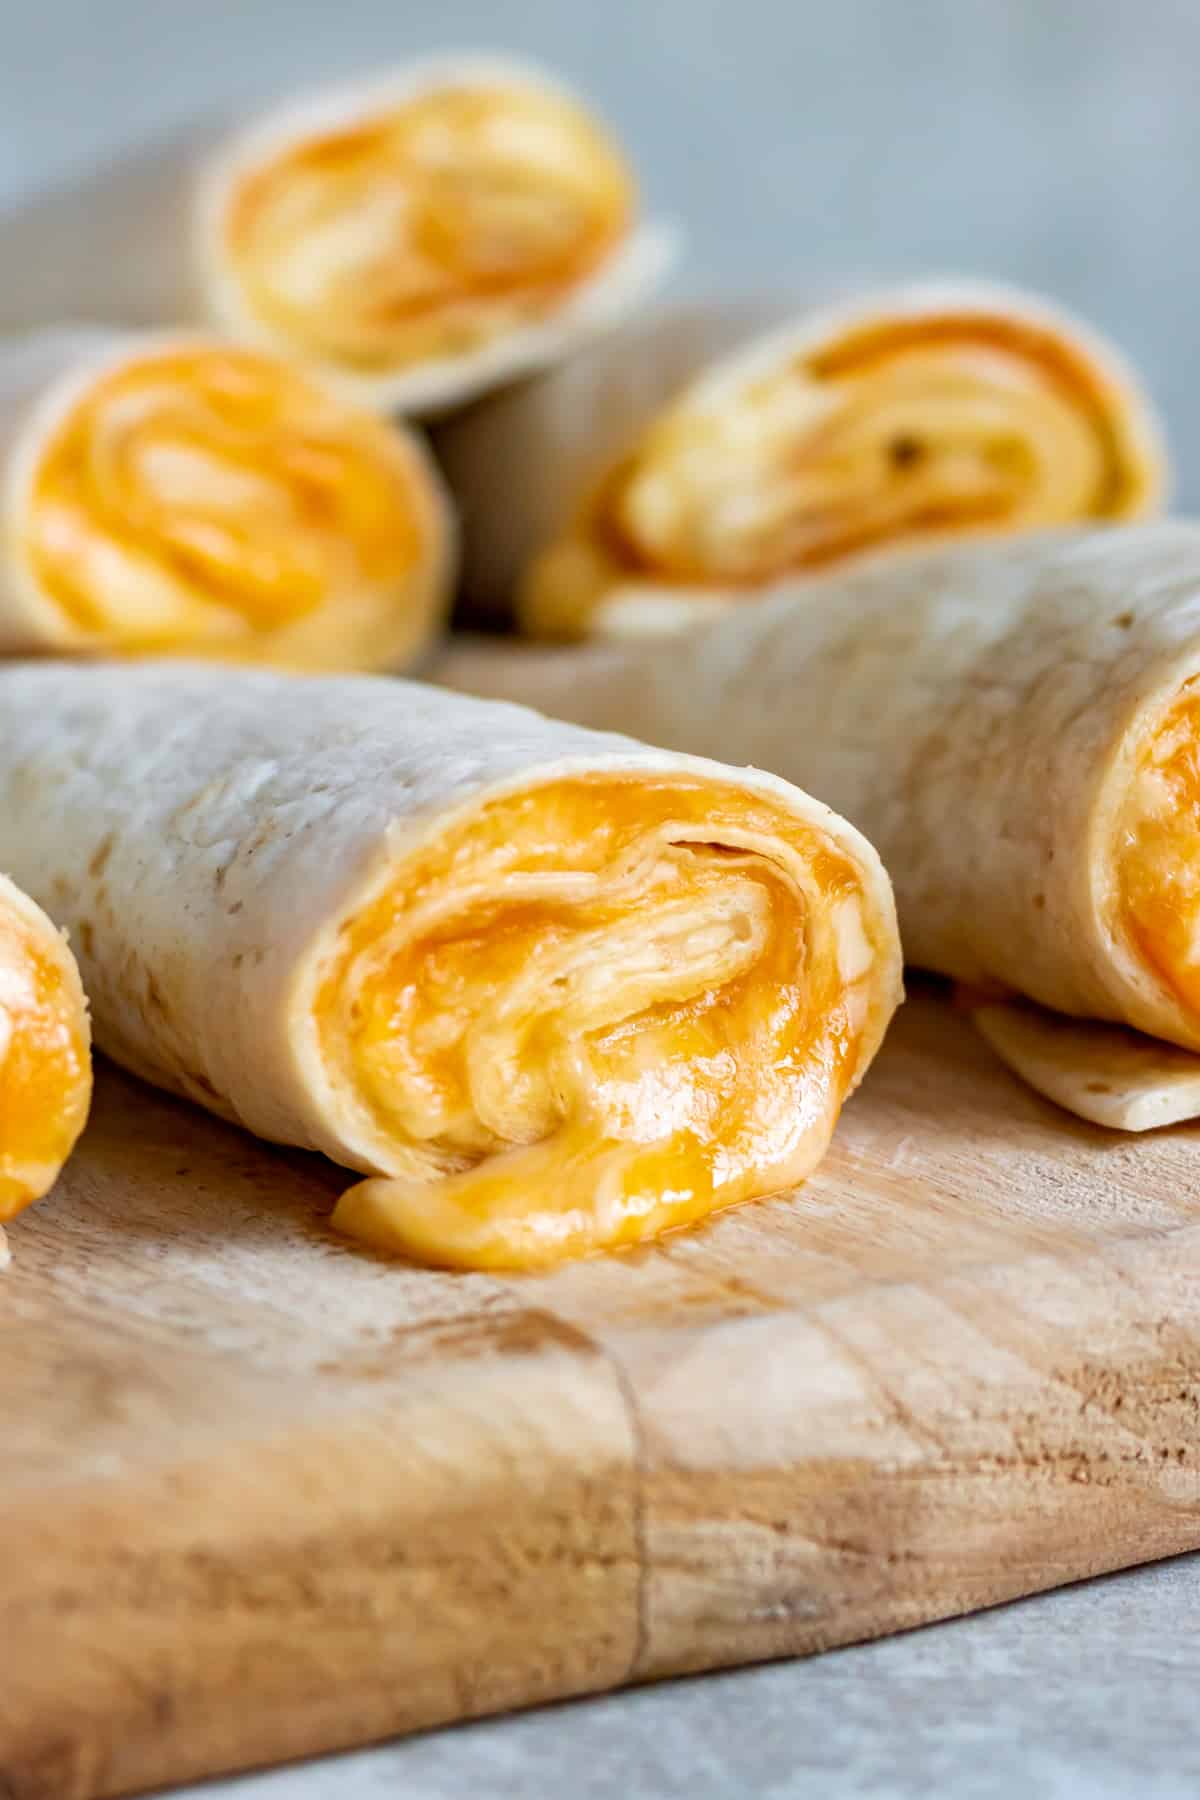 Several tortilla roll ups oozing cheese on a cutting board.